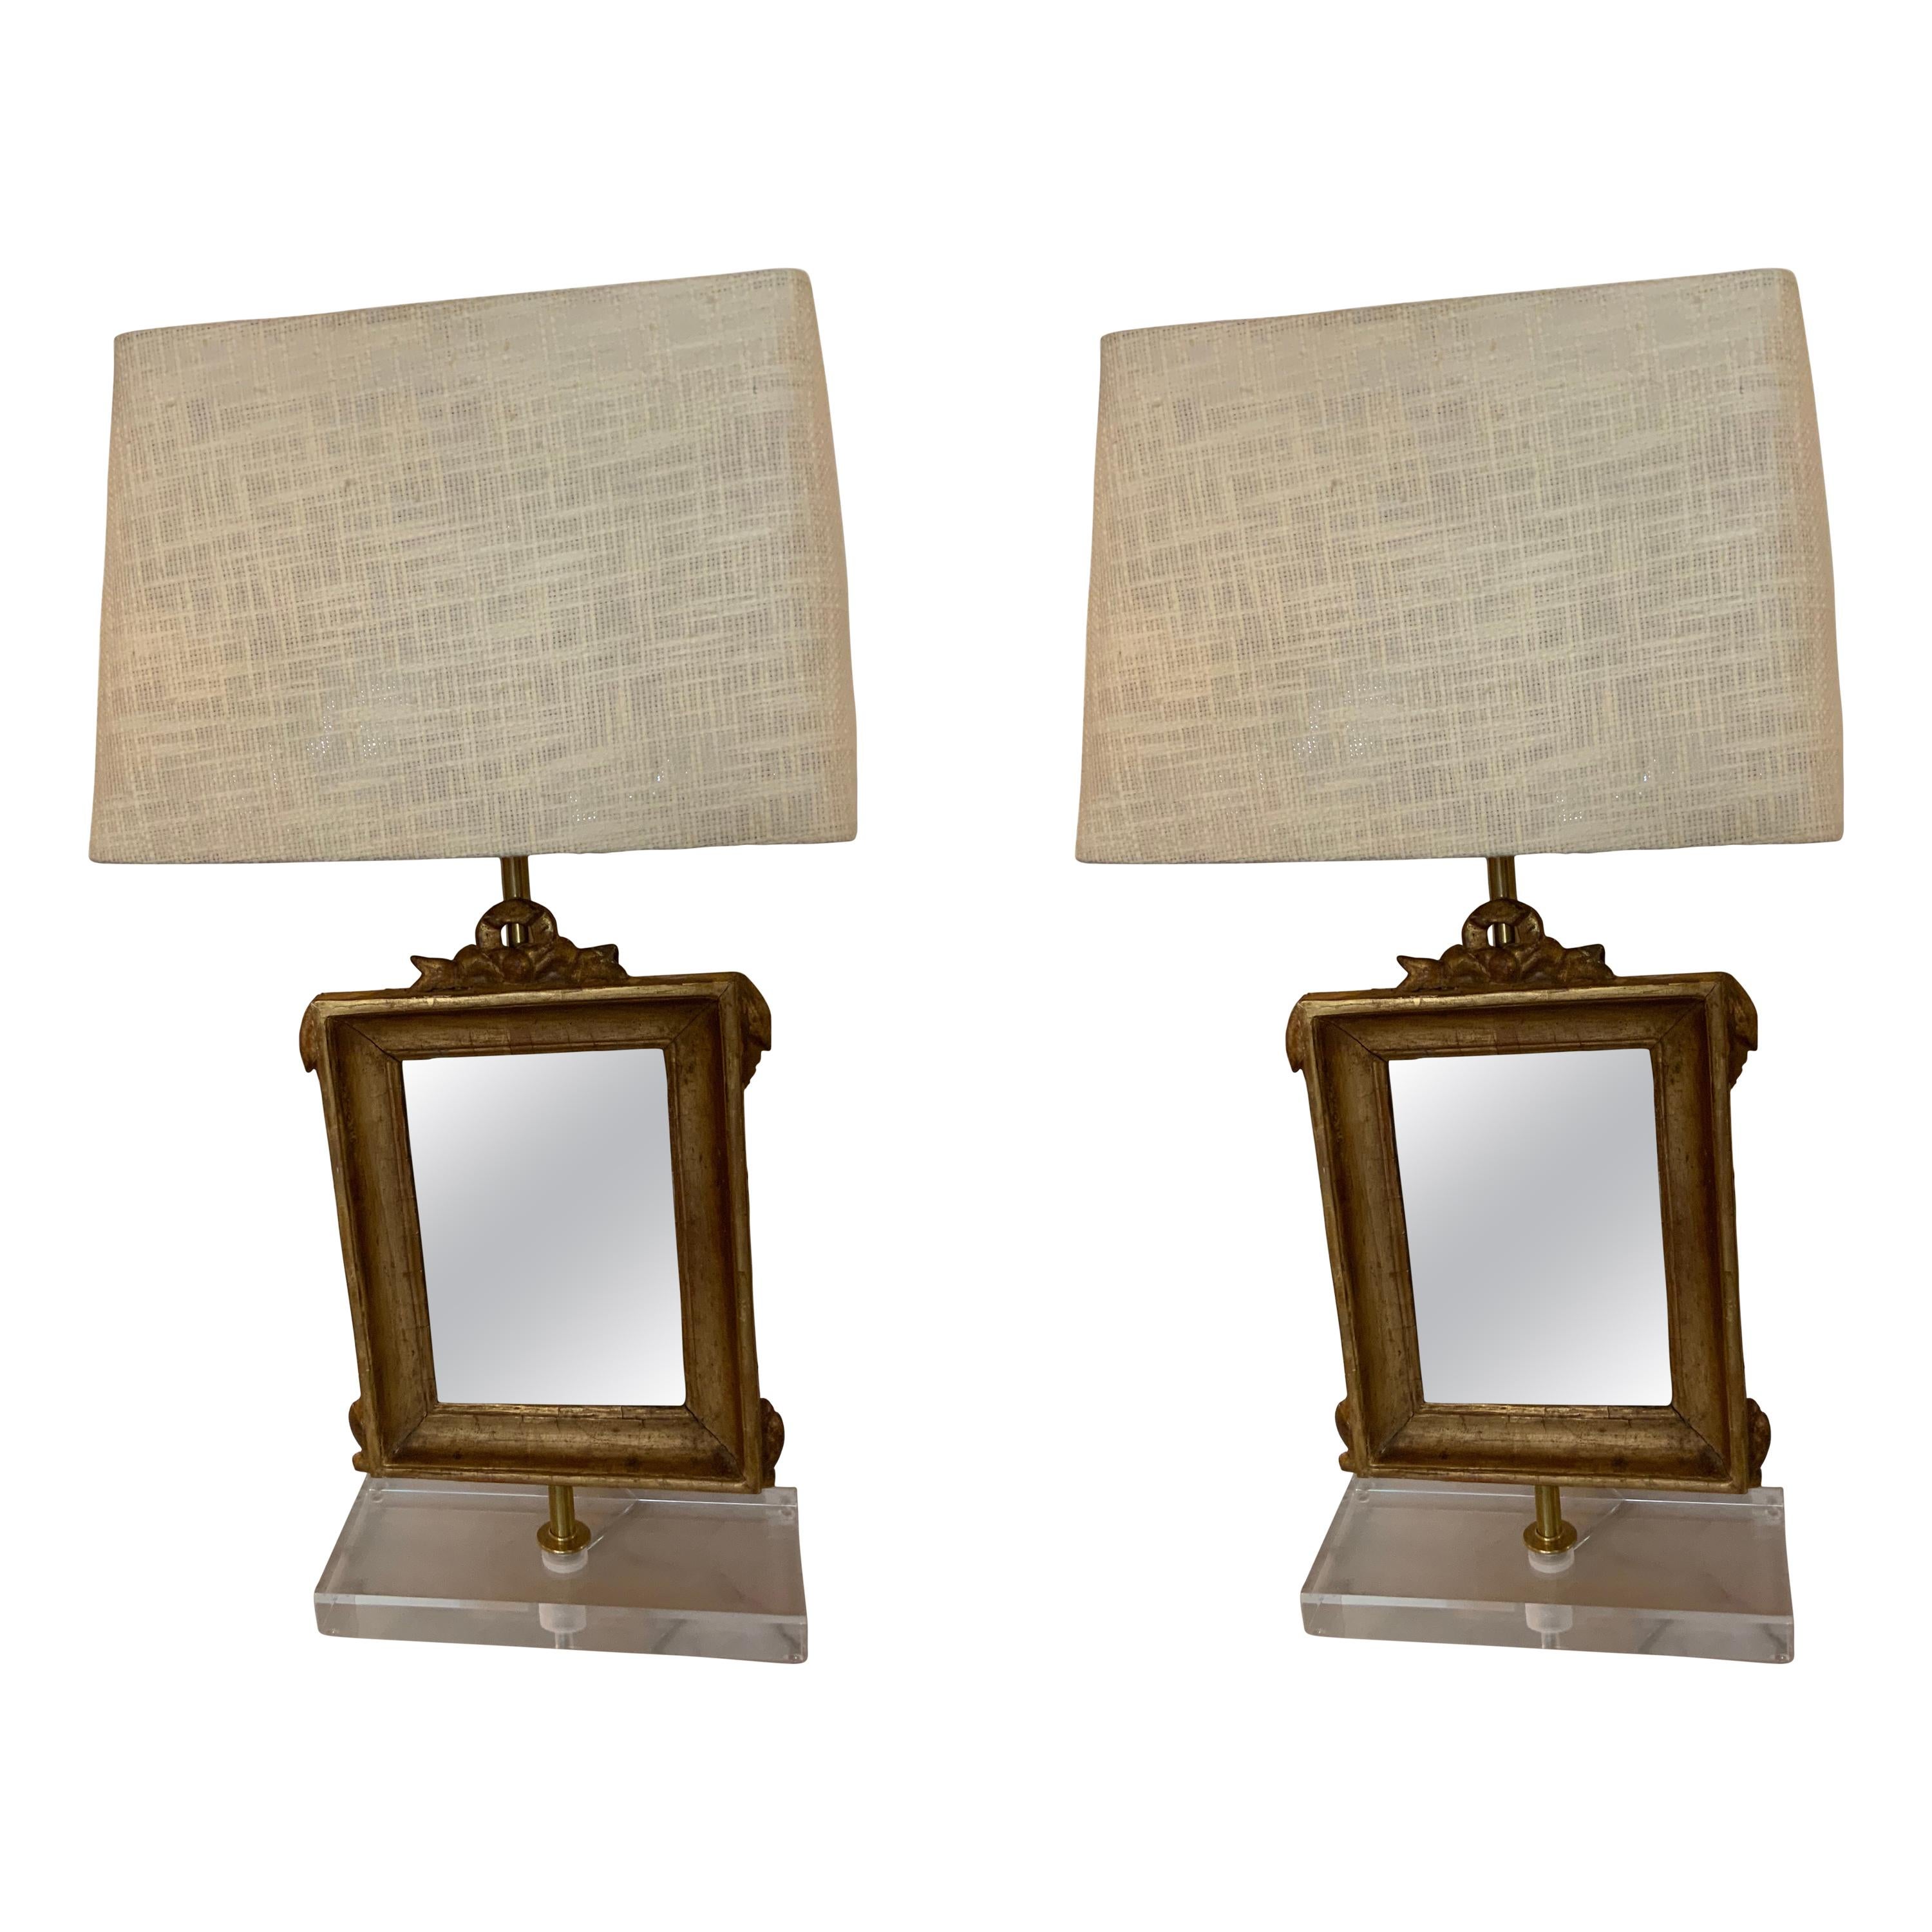 Pair of Giltwood 19th C. Mirrors, Mounted as Lamps on Acrylic Bases For Sale